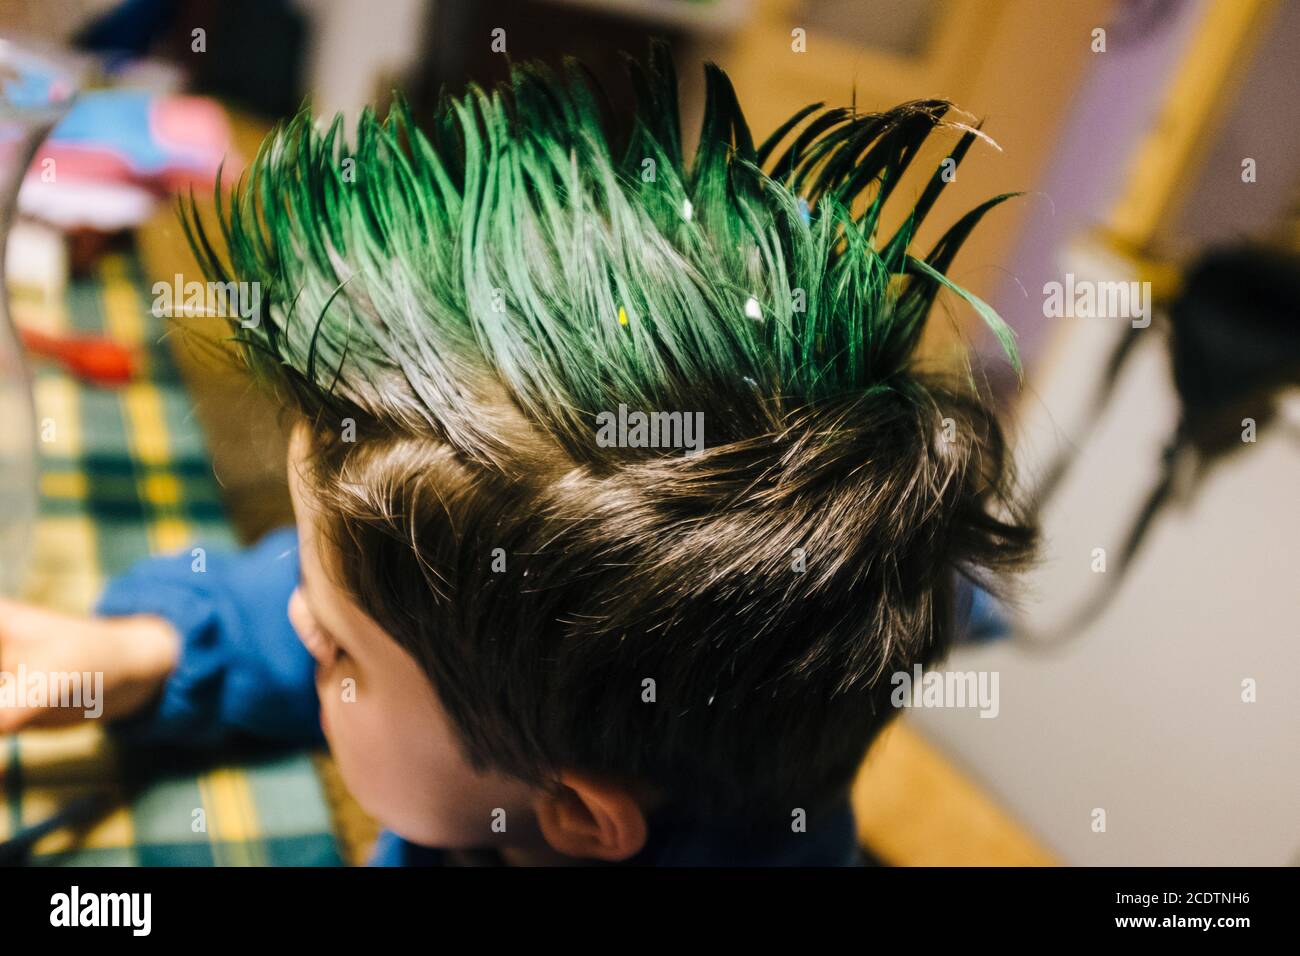 portrait of 9 year old boy at home with crest of green colored hair, performs funny gestures on the face with hands Stock Photo